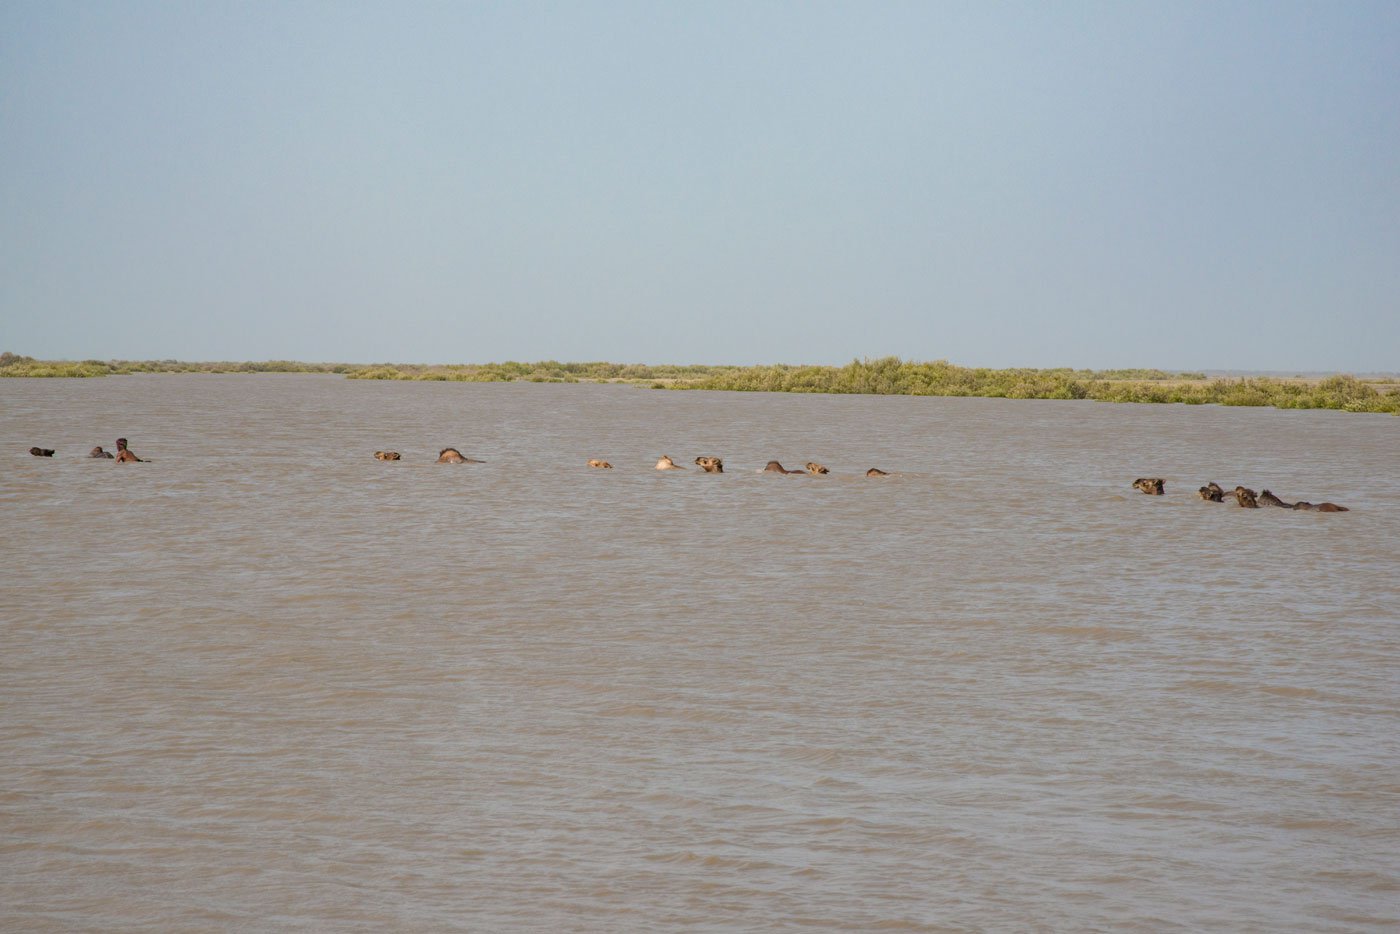 The swimming camels float through the creeks in the Marine National Park in search of food